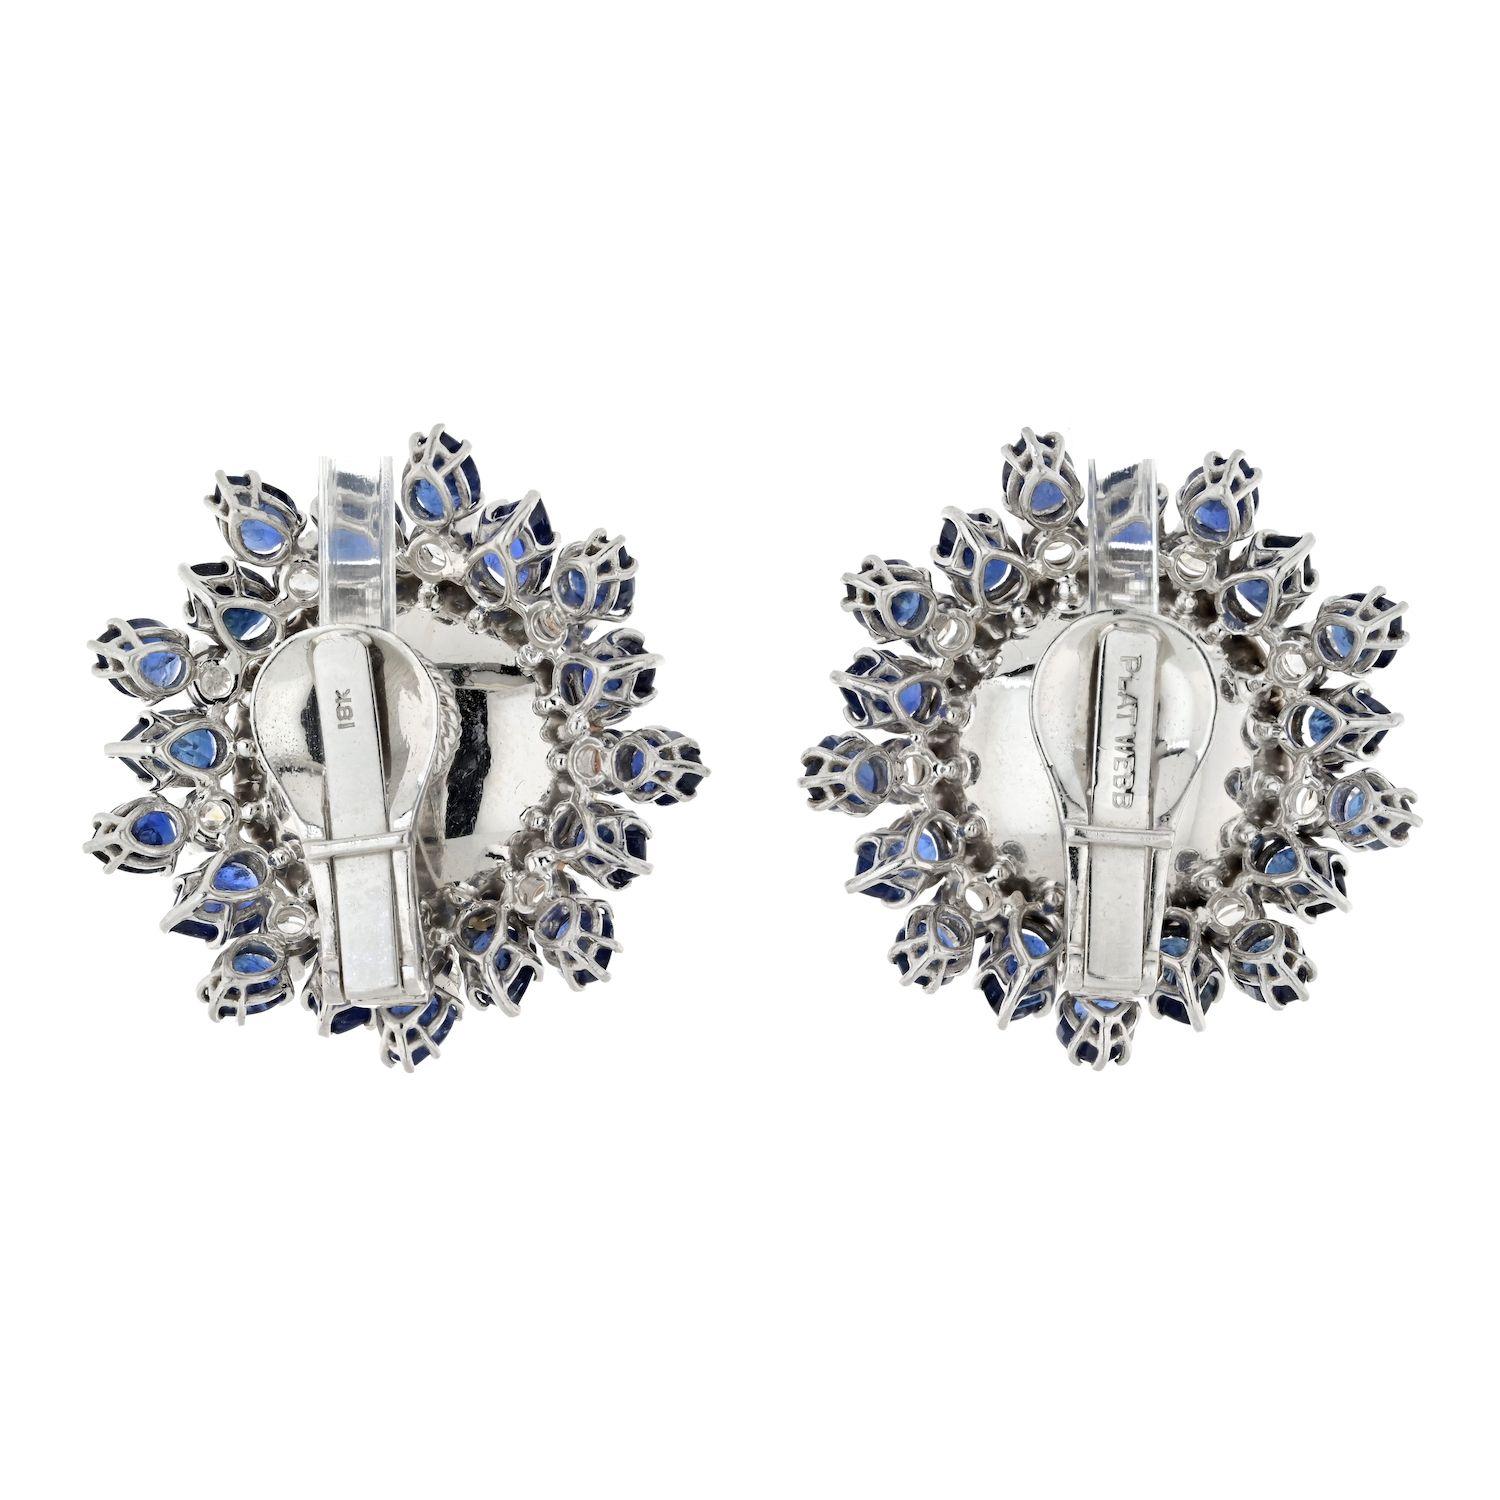 Introducing a captivating pair of earrings from the renowned designer David Webb, the Platinum and 18K White Gold Mobe Pearl Earrings. These earrings exude a timeless elegance and showcase the finest craftsmanship. At the center of each earring are